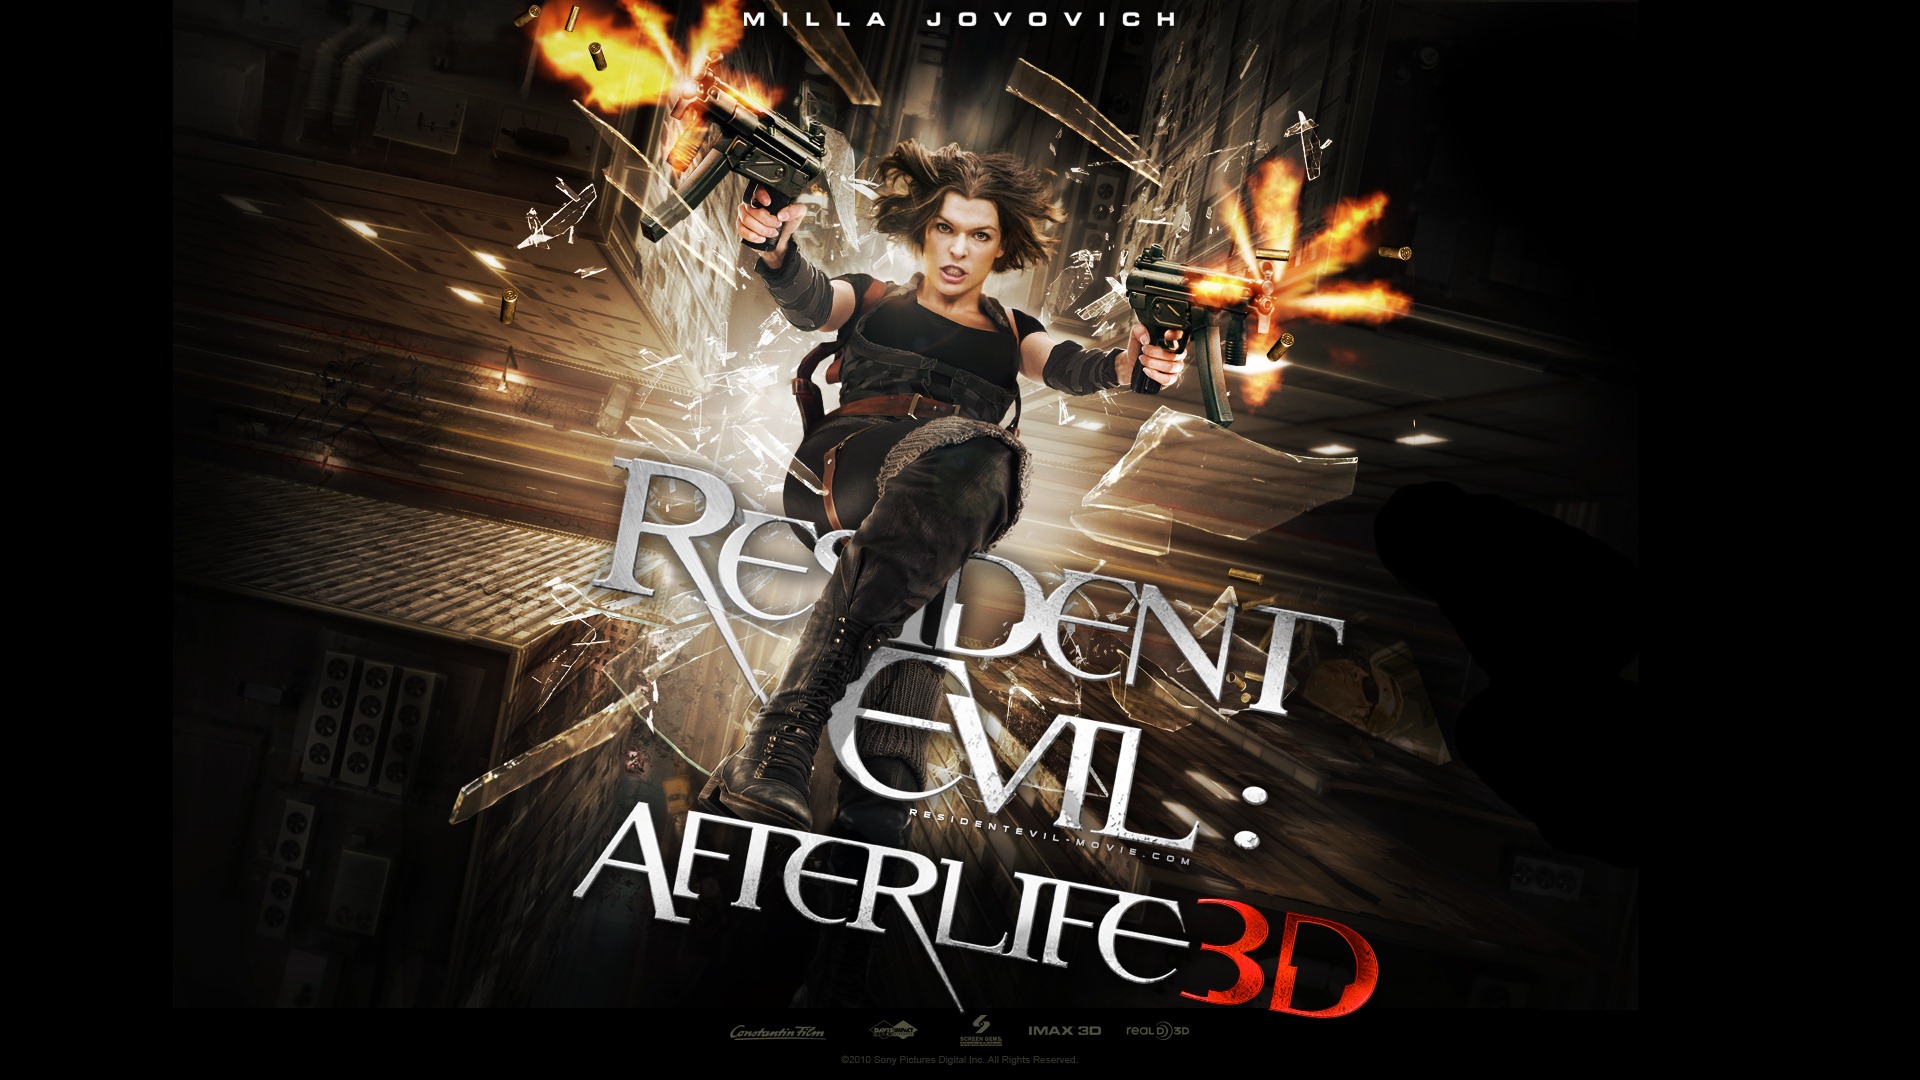 62 Resident Evil: Afterlife HD Wallpapers | Backgrounds ...